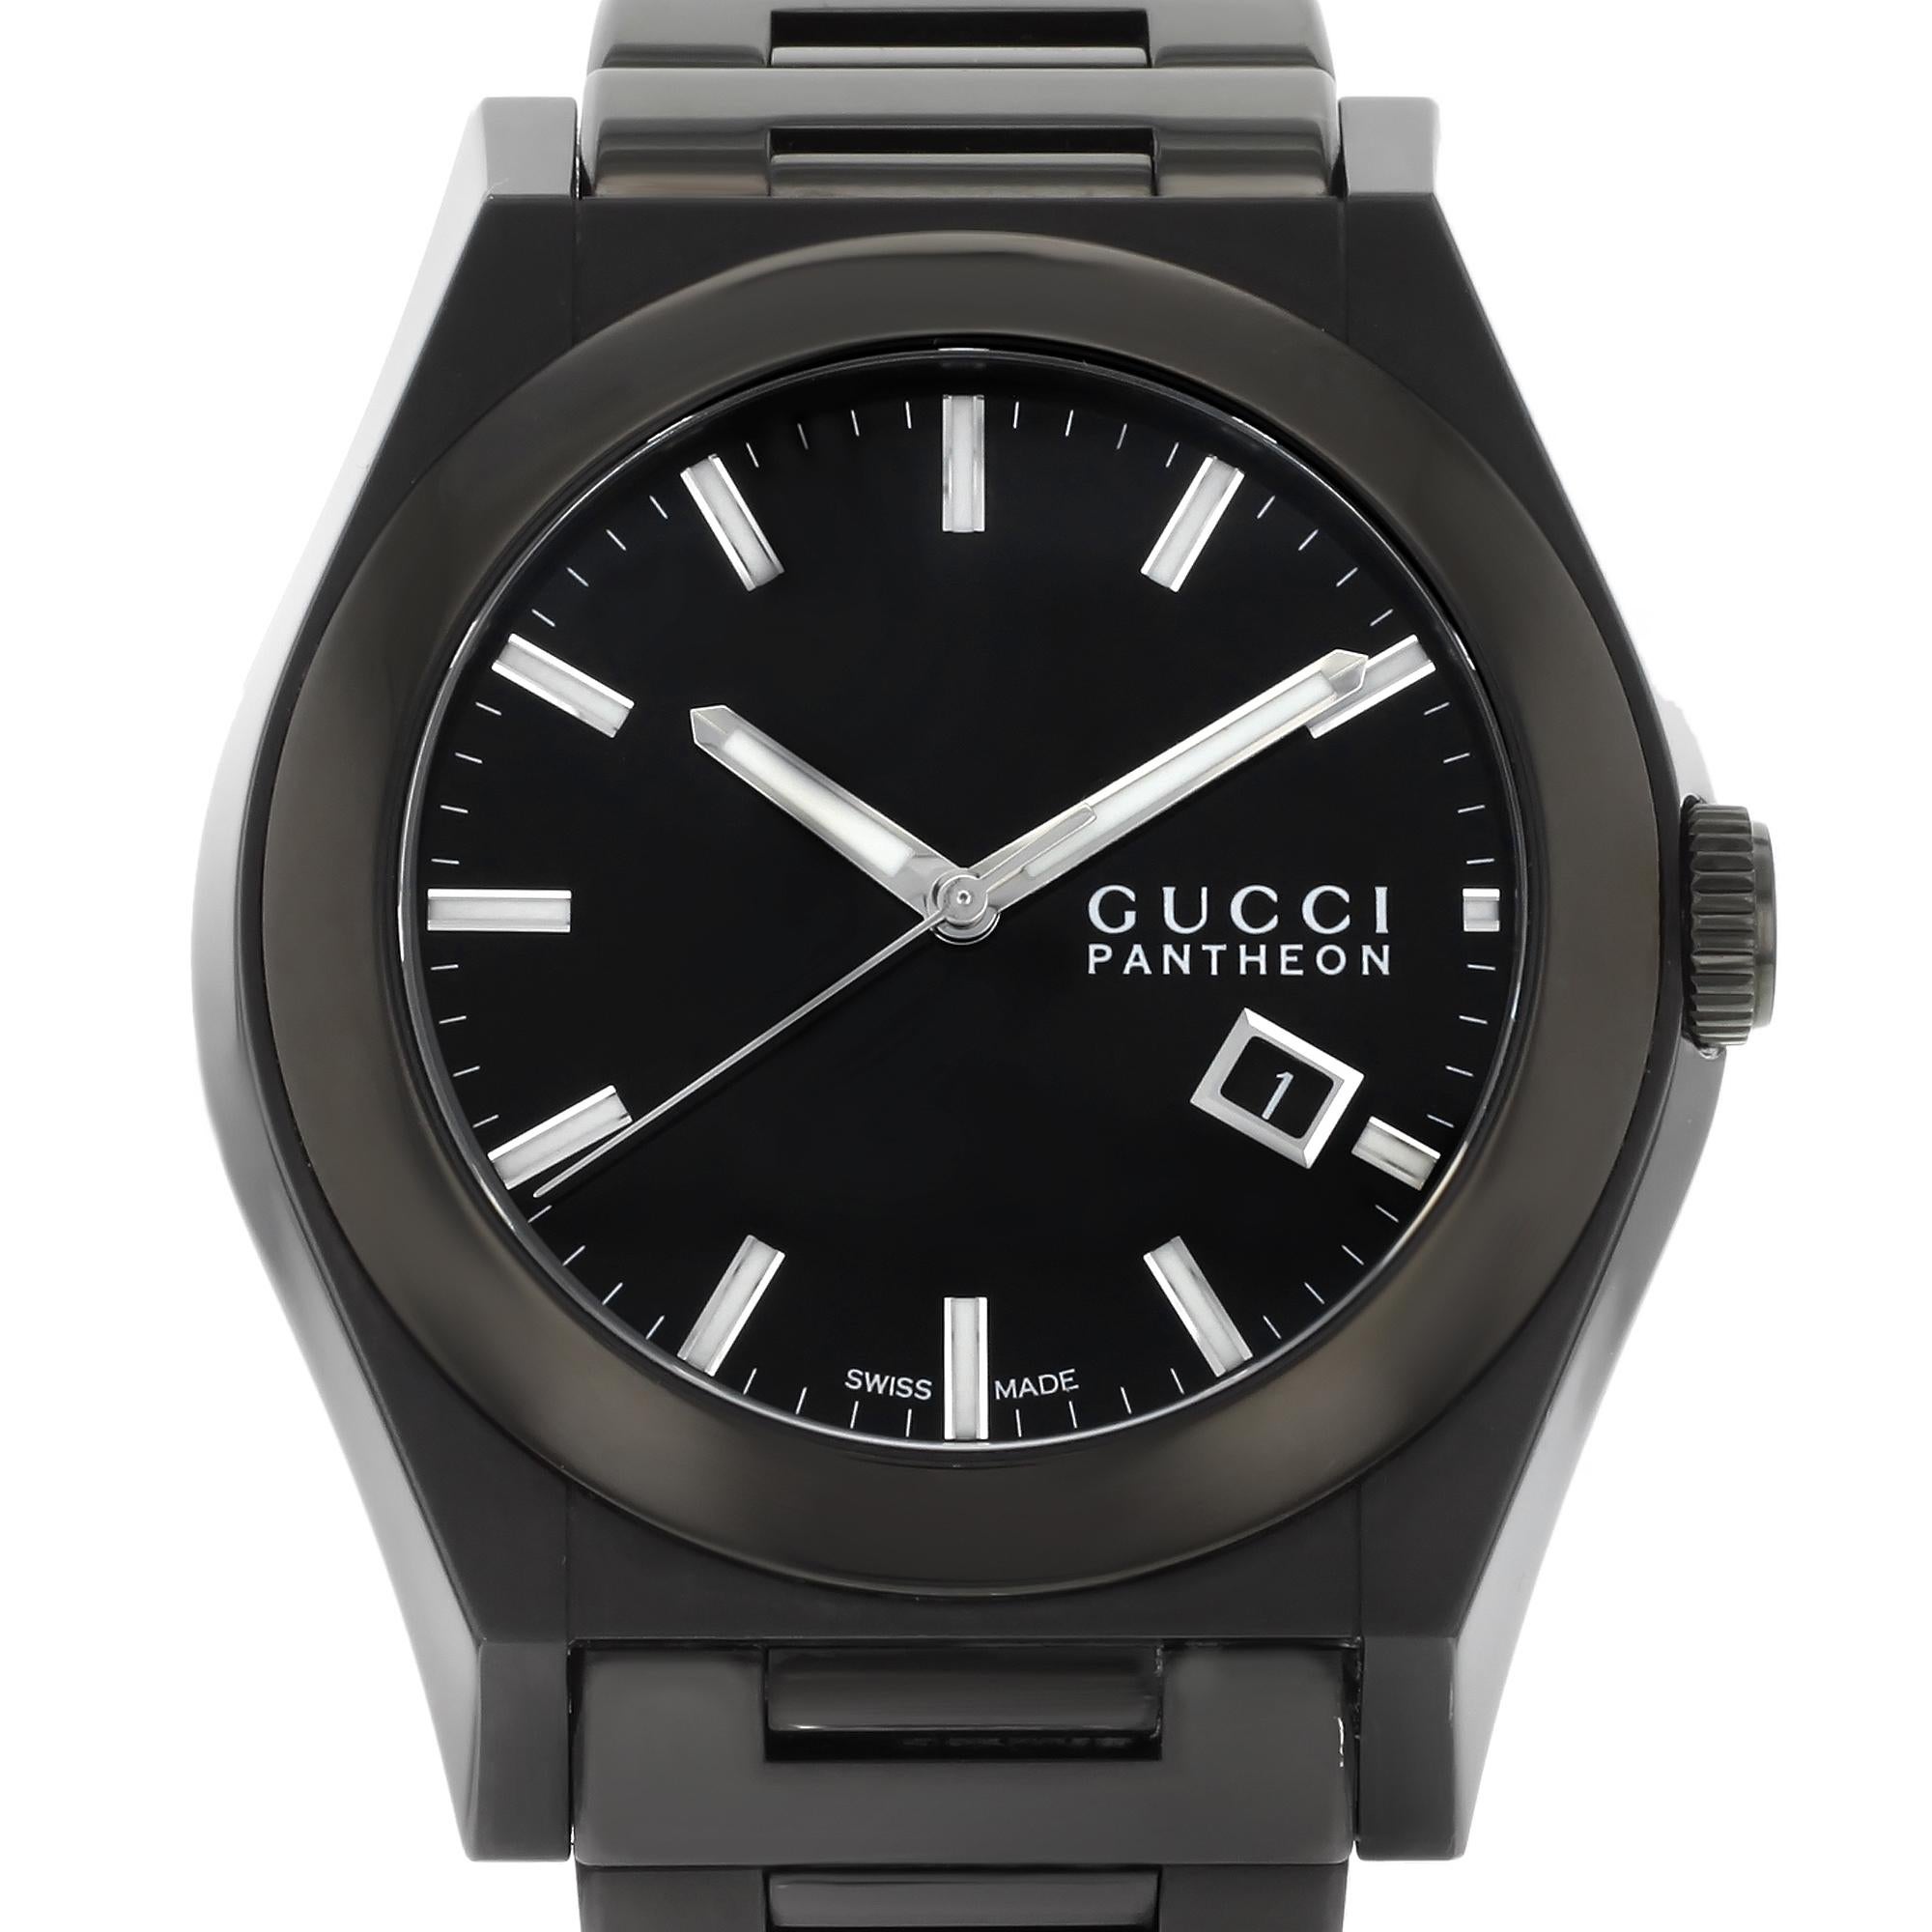 This pre-owned Gucci Pantheon YA115244 is a beautiful men's timepiece that is powered by a quartz movement which is cased in a stainless steel case. Minor blemish on PVD. It has a round shape face, date dial, and has hand sticks style markers. It is